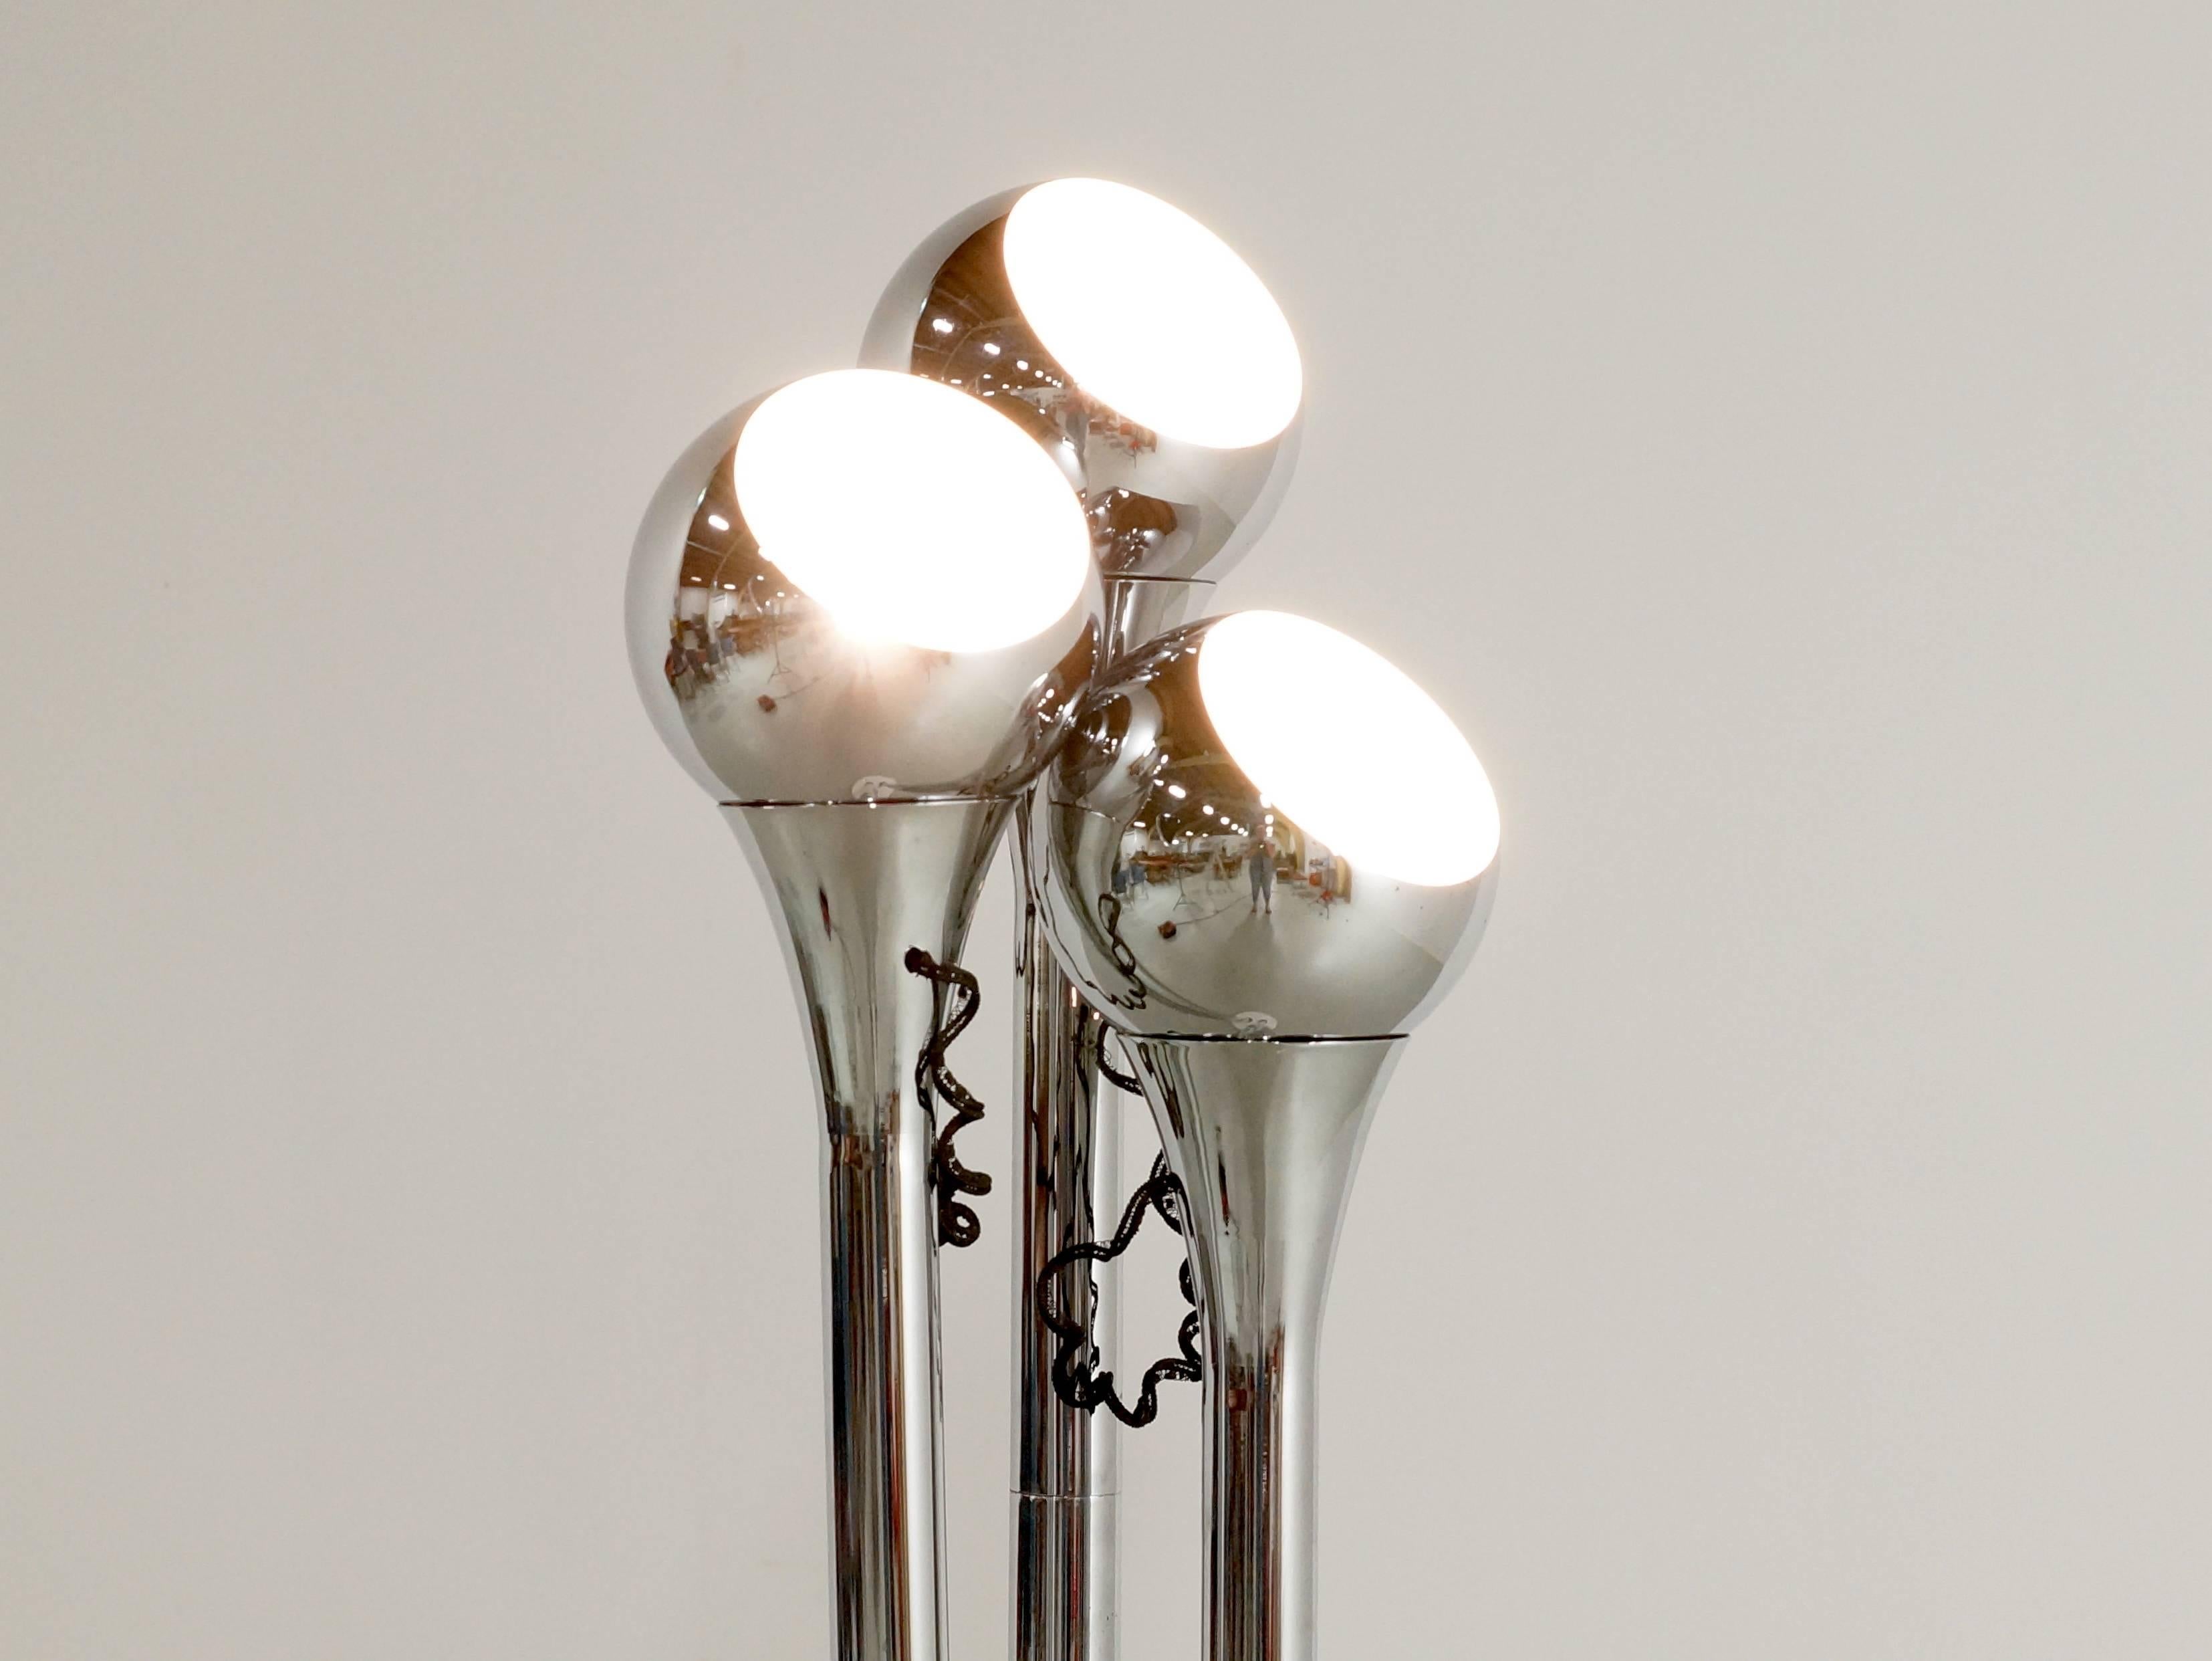 Italian Reggiani Floor Lamp with Three Chrome Spots on a White Base For Sale